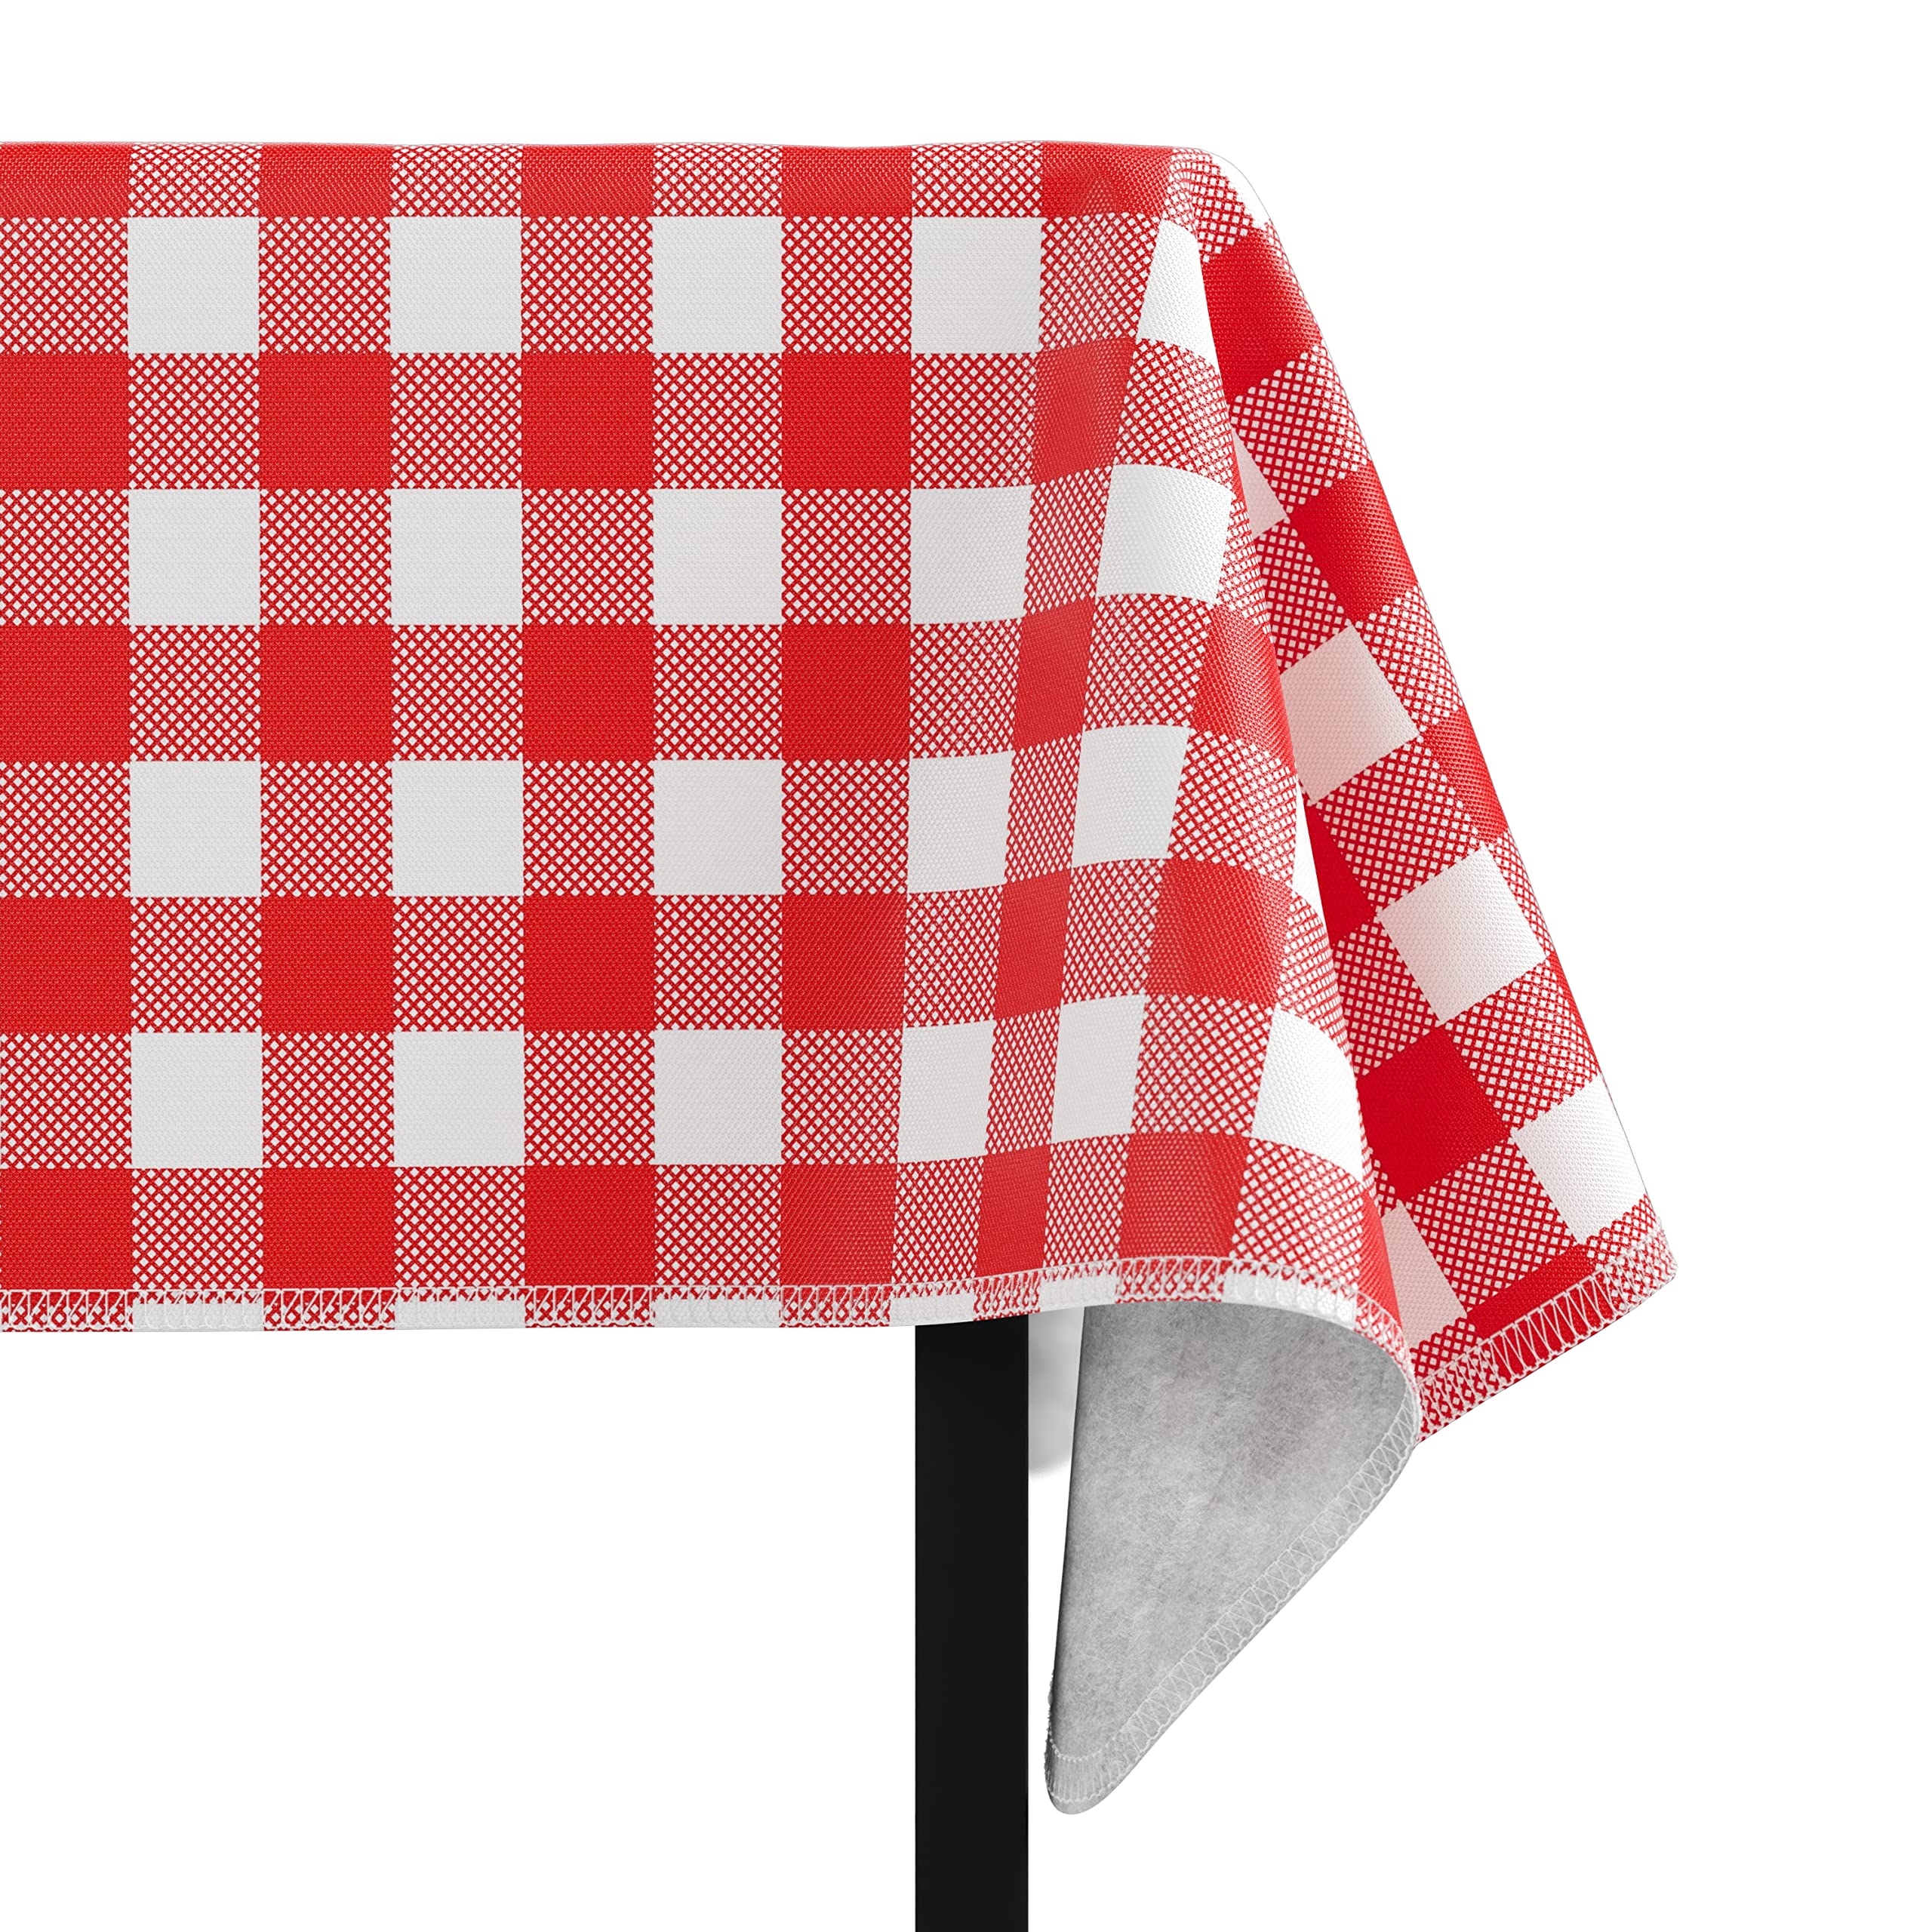 Red Gingham Flannel Backed Table Cover 54 In. x 108 In.